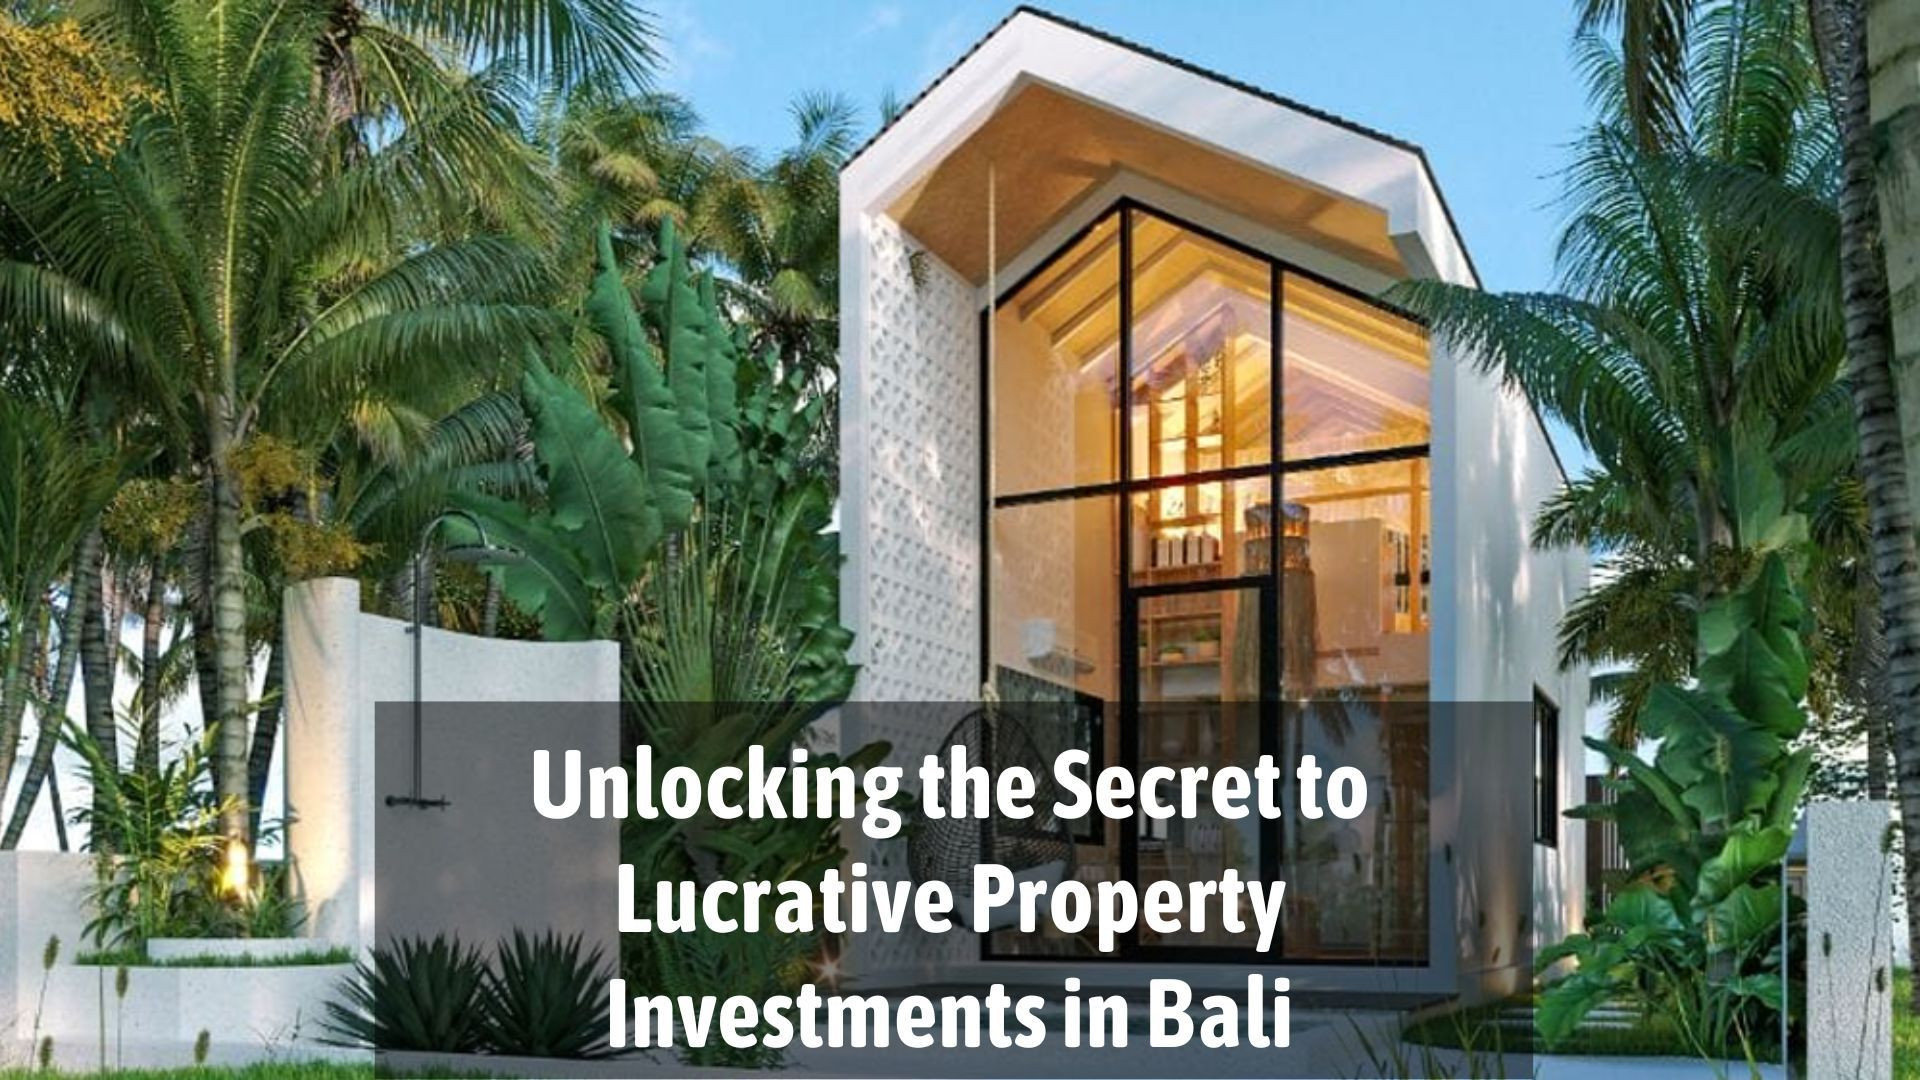 Unlocking the Secret to Lucrative Property Investments in Bali